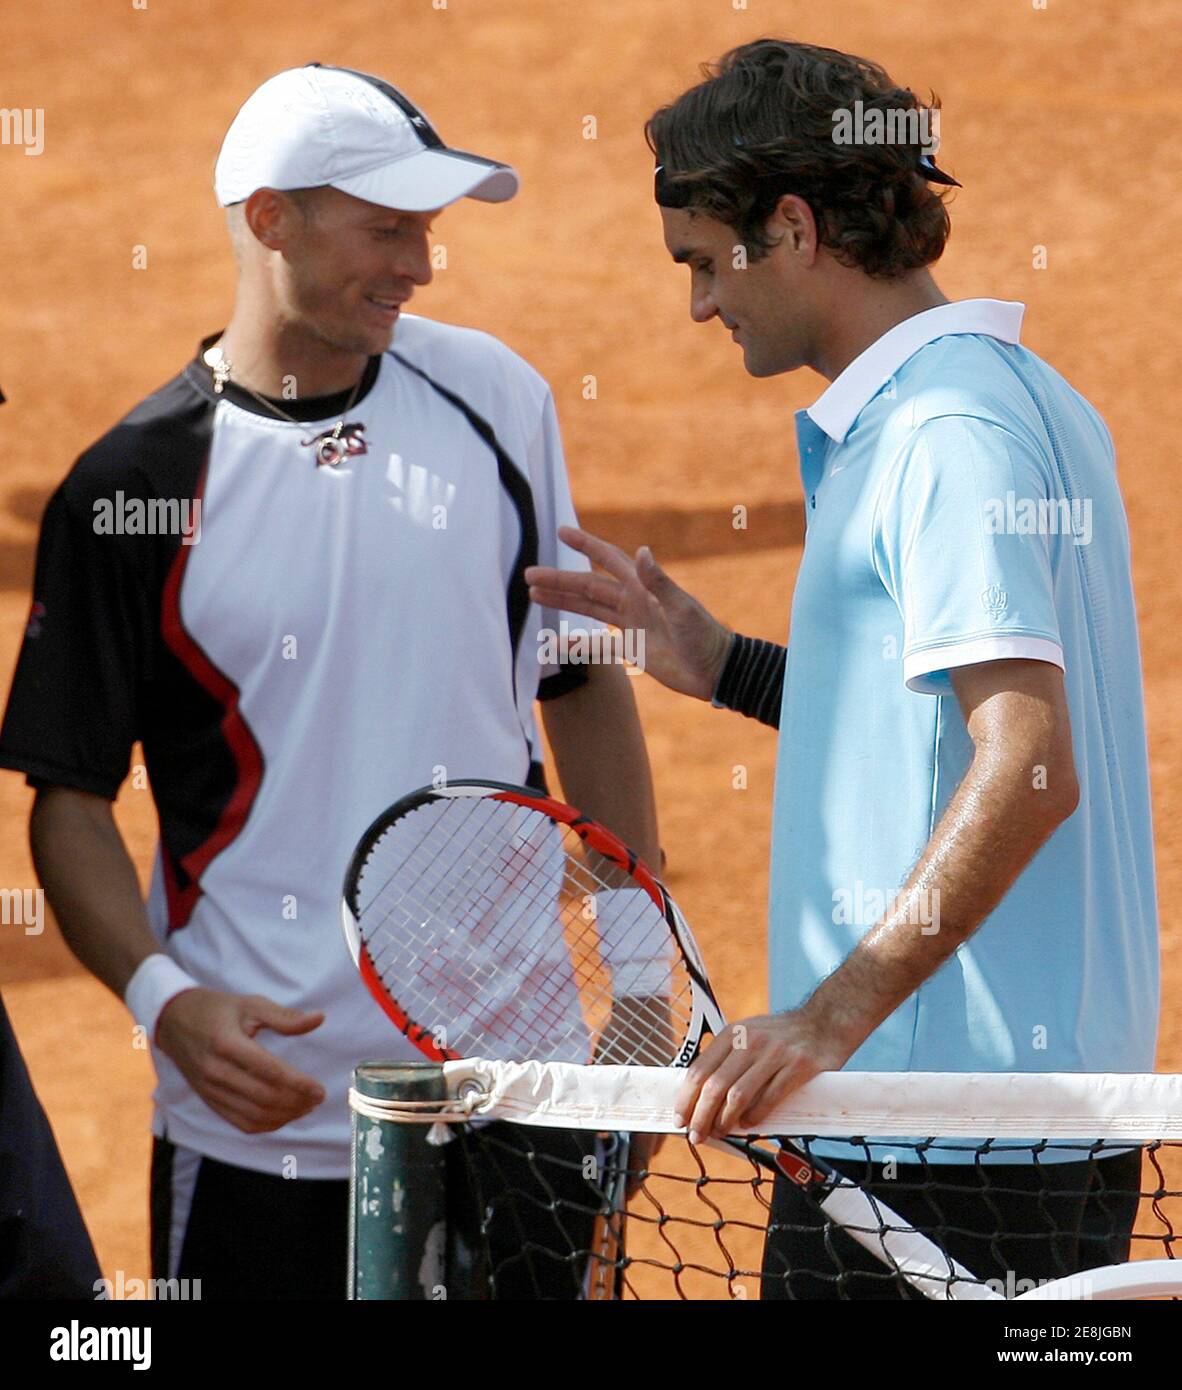 Roger Federer (R) of Switzerland shakes hands Nikolay Davydenko of Russia  during their final match at the Estoril Open tennis tournament in Lisbon  April 20, 2008. Federer won the tournament by the